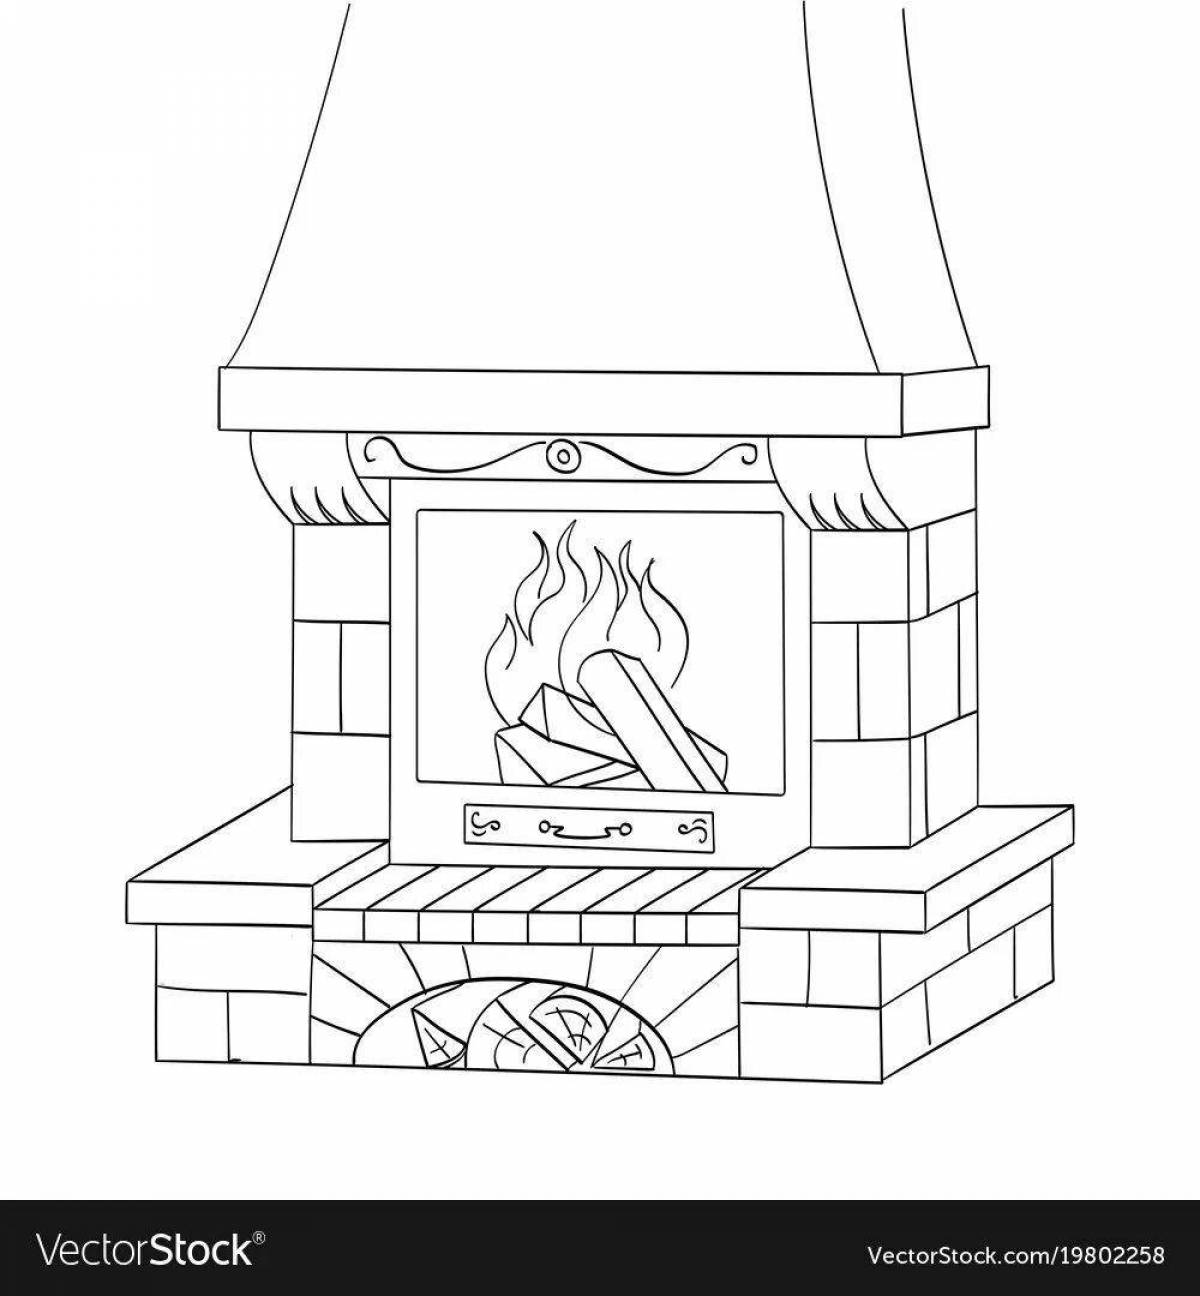 Joyful coloring of the fireplace for children